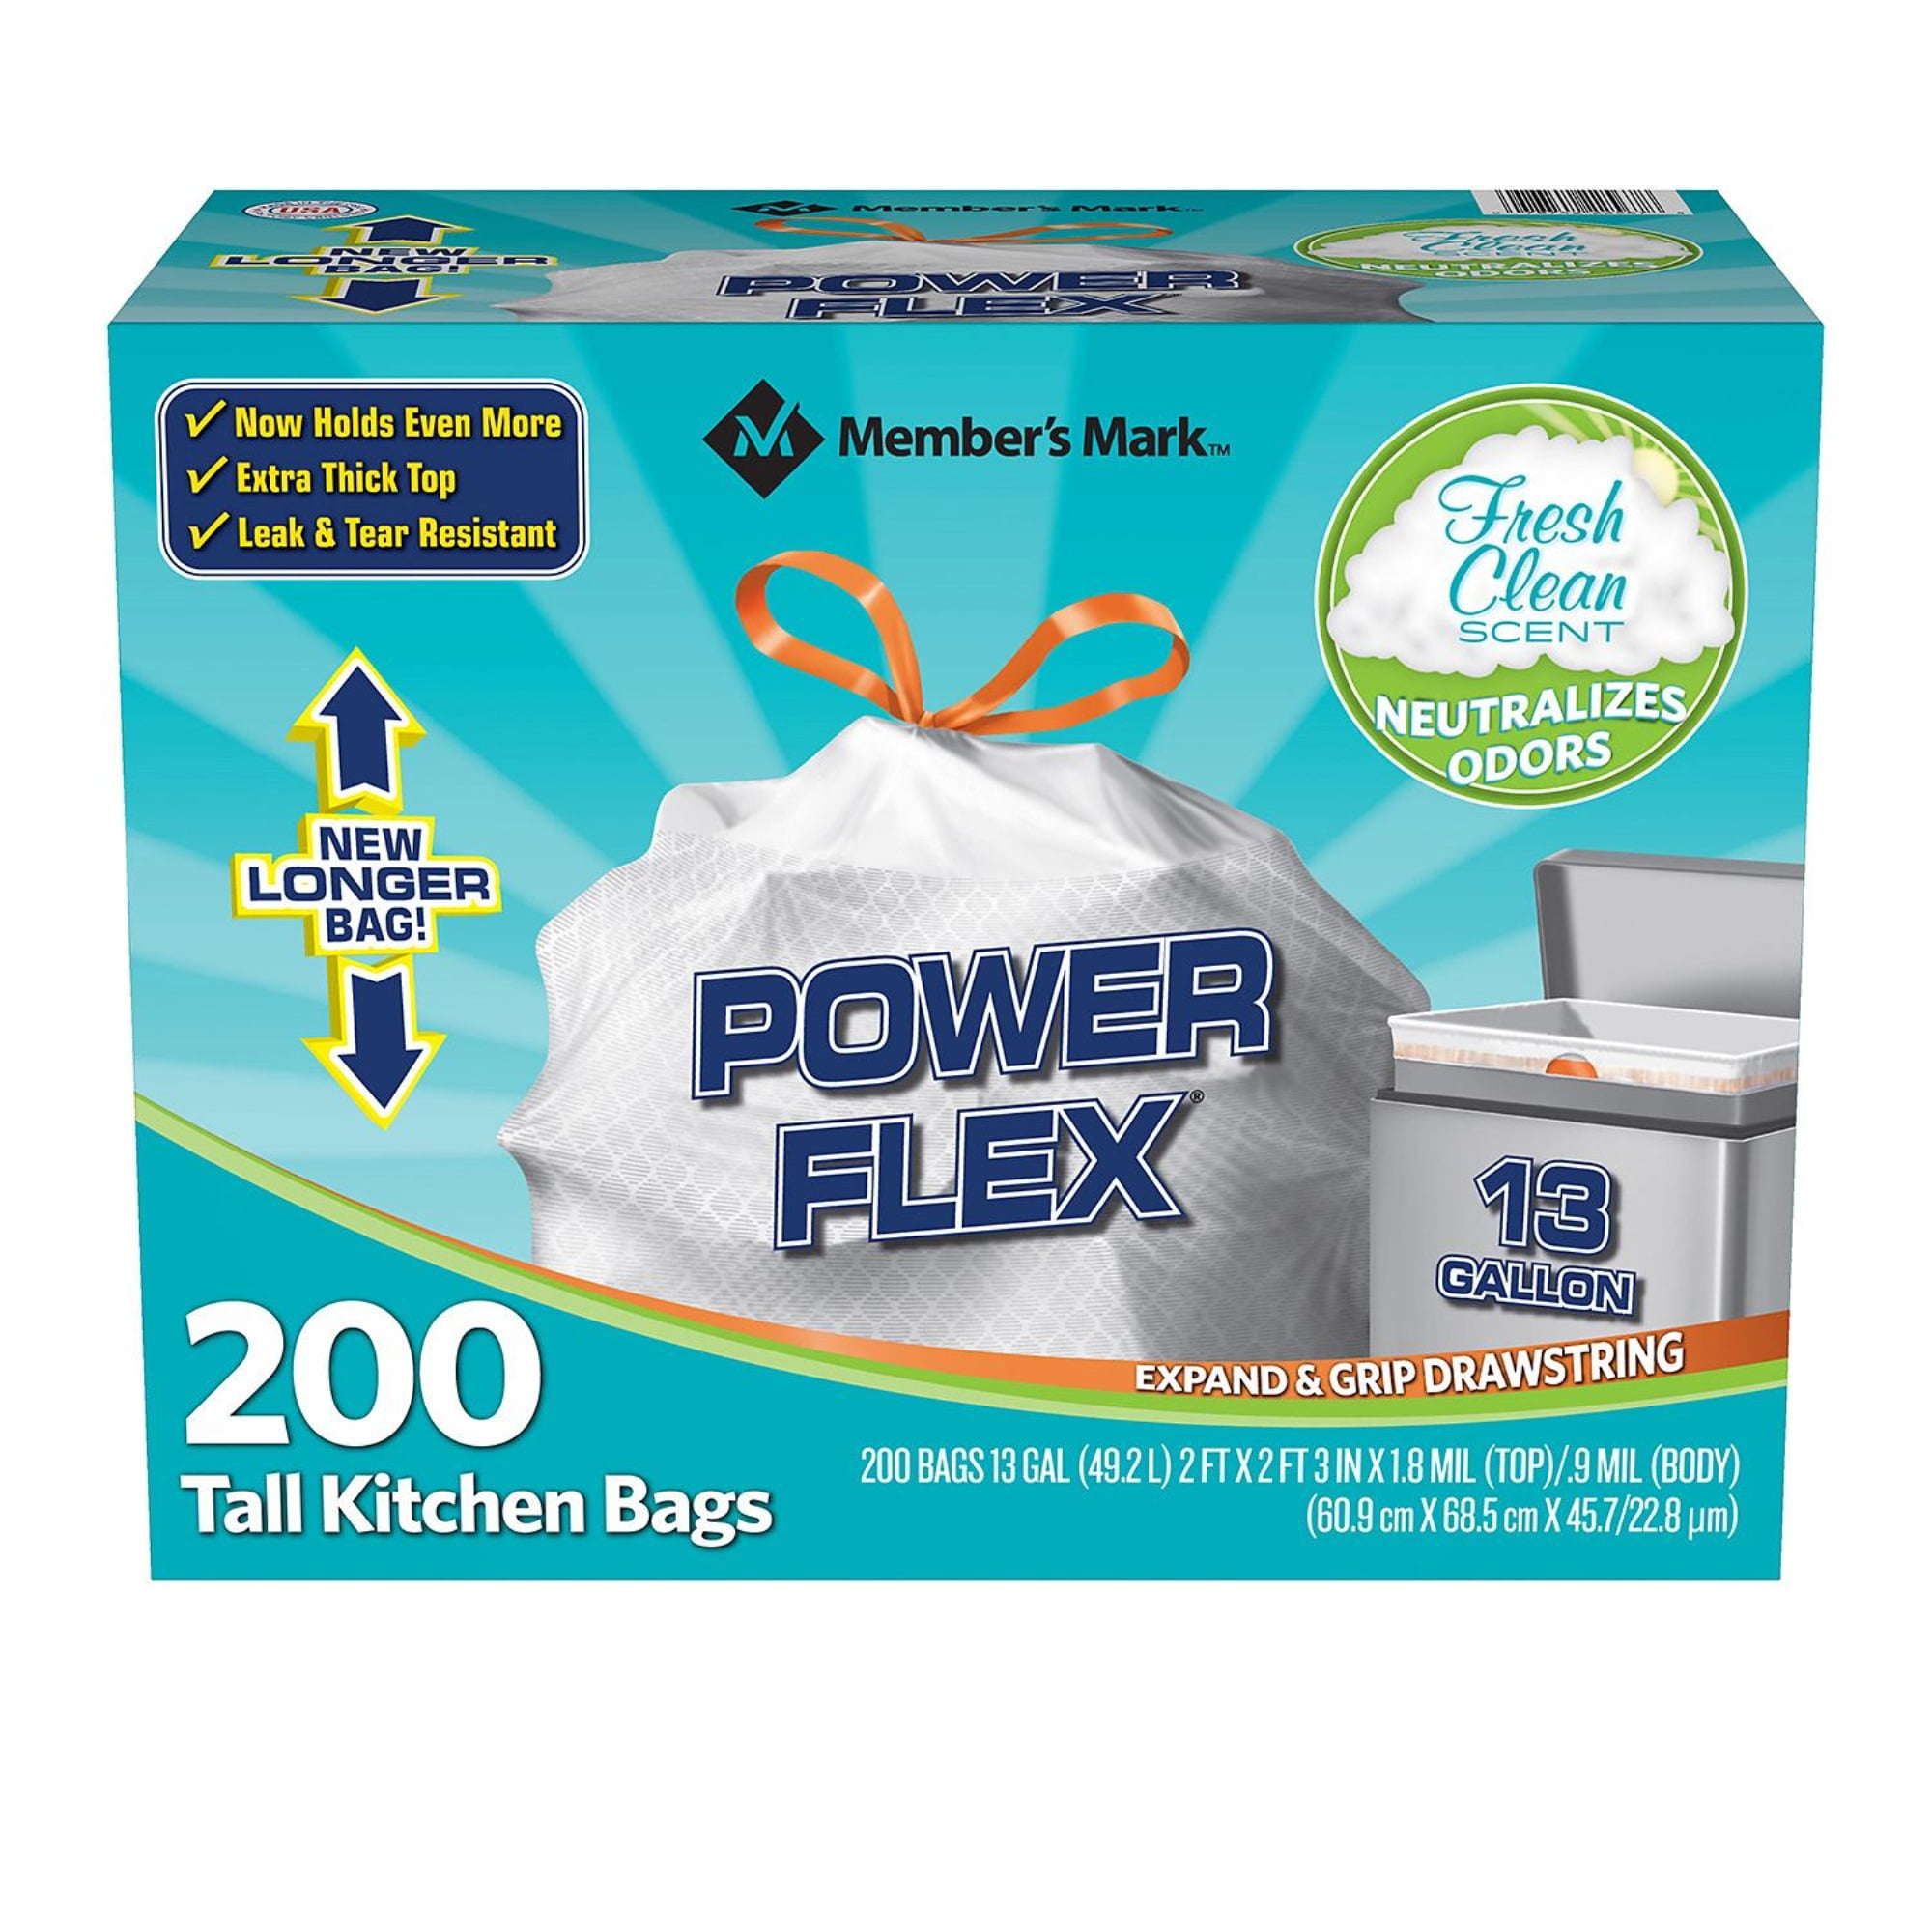 PGS 2 Gallon Small Trash Bags Clear 100 Counts/ 2 Rolls